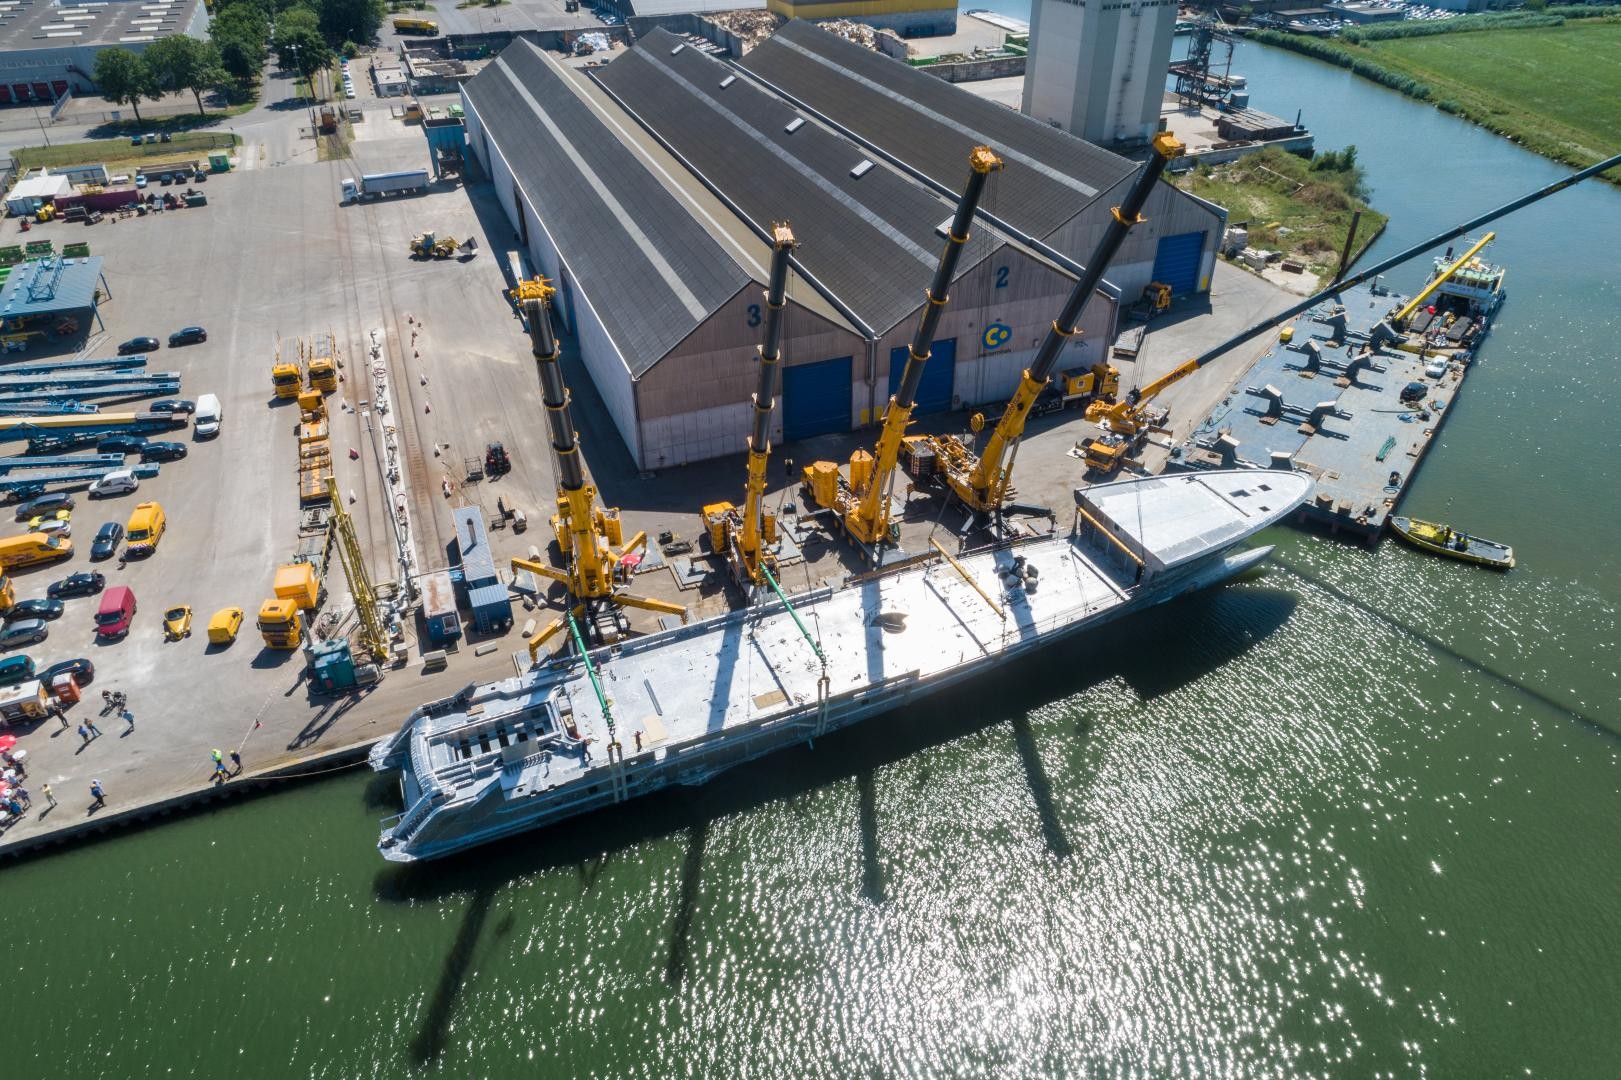 Heesen’s biggest assembly to date has taken place at the shipyard in Oss